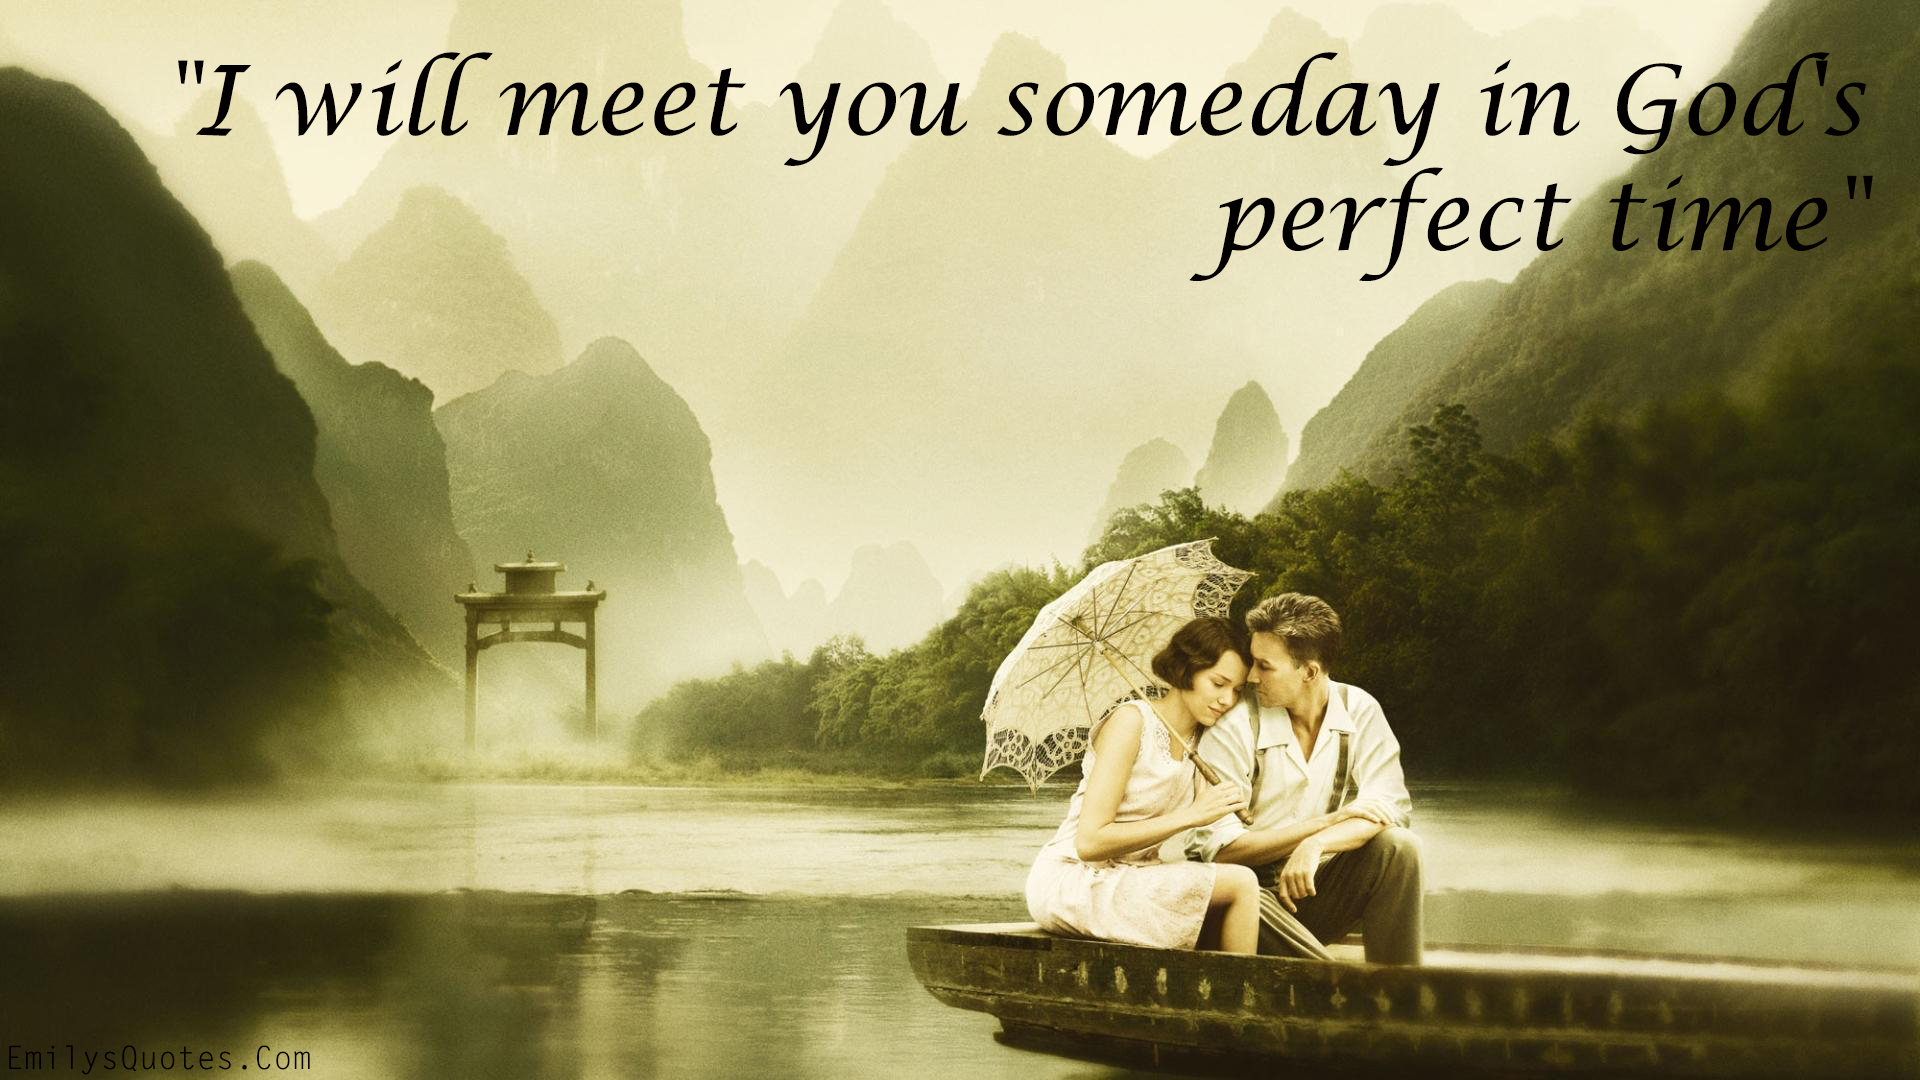 I will meet you someday in God’s perfect time